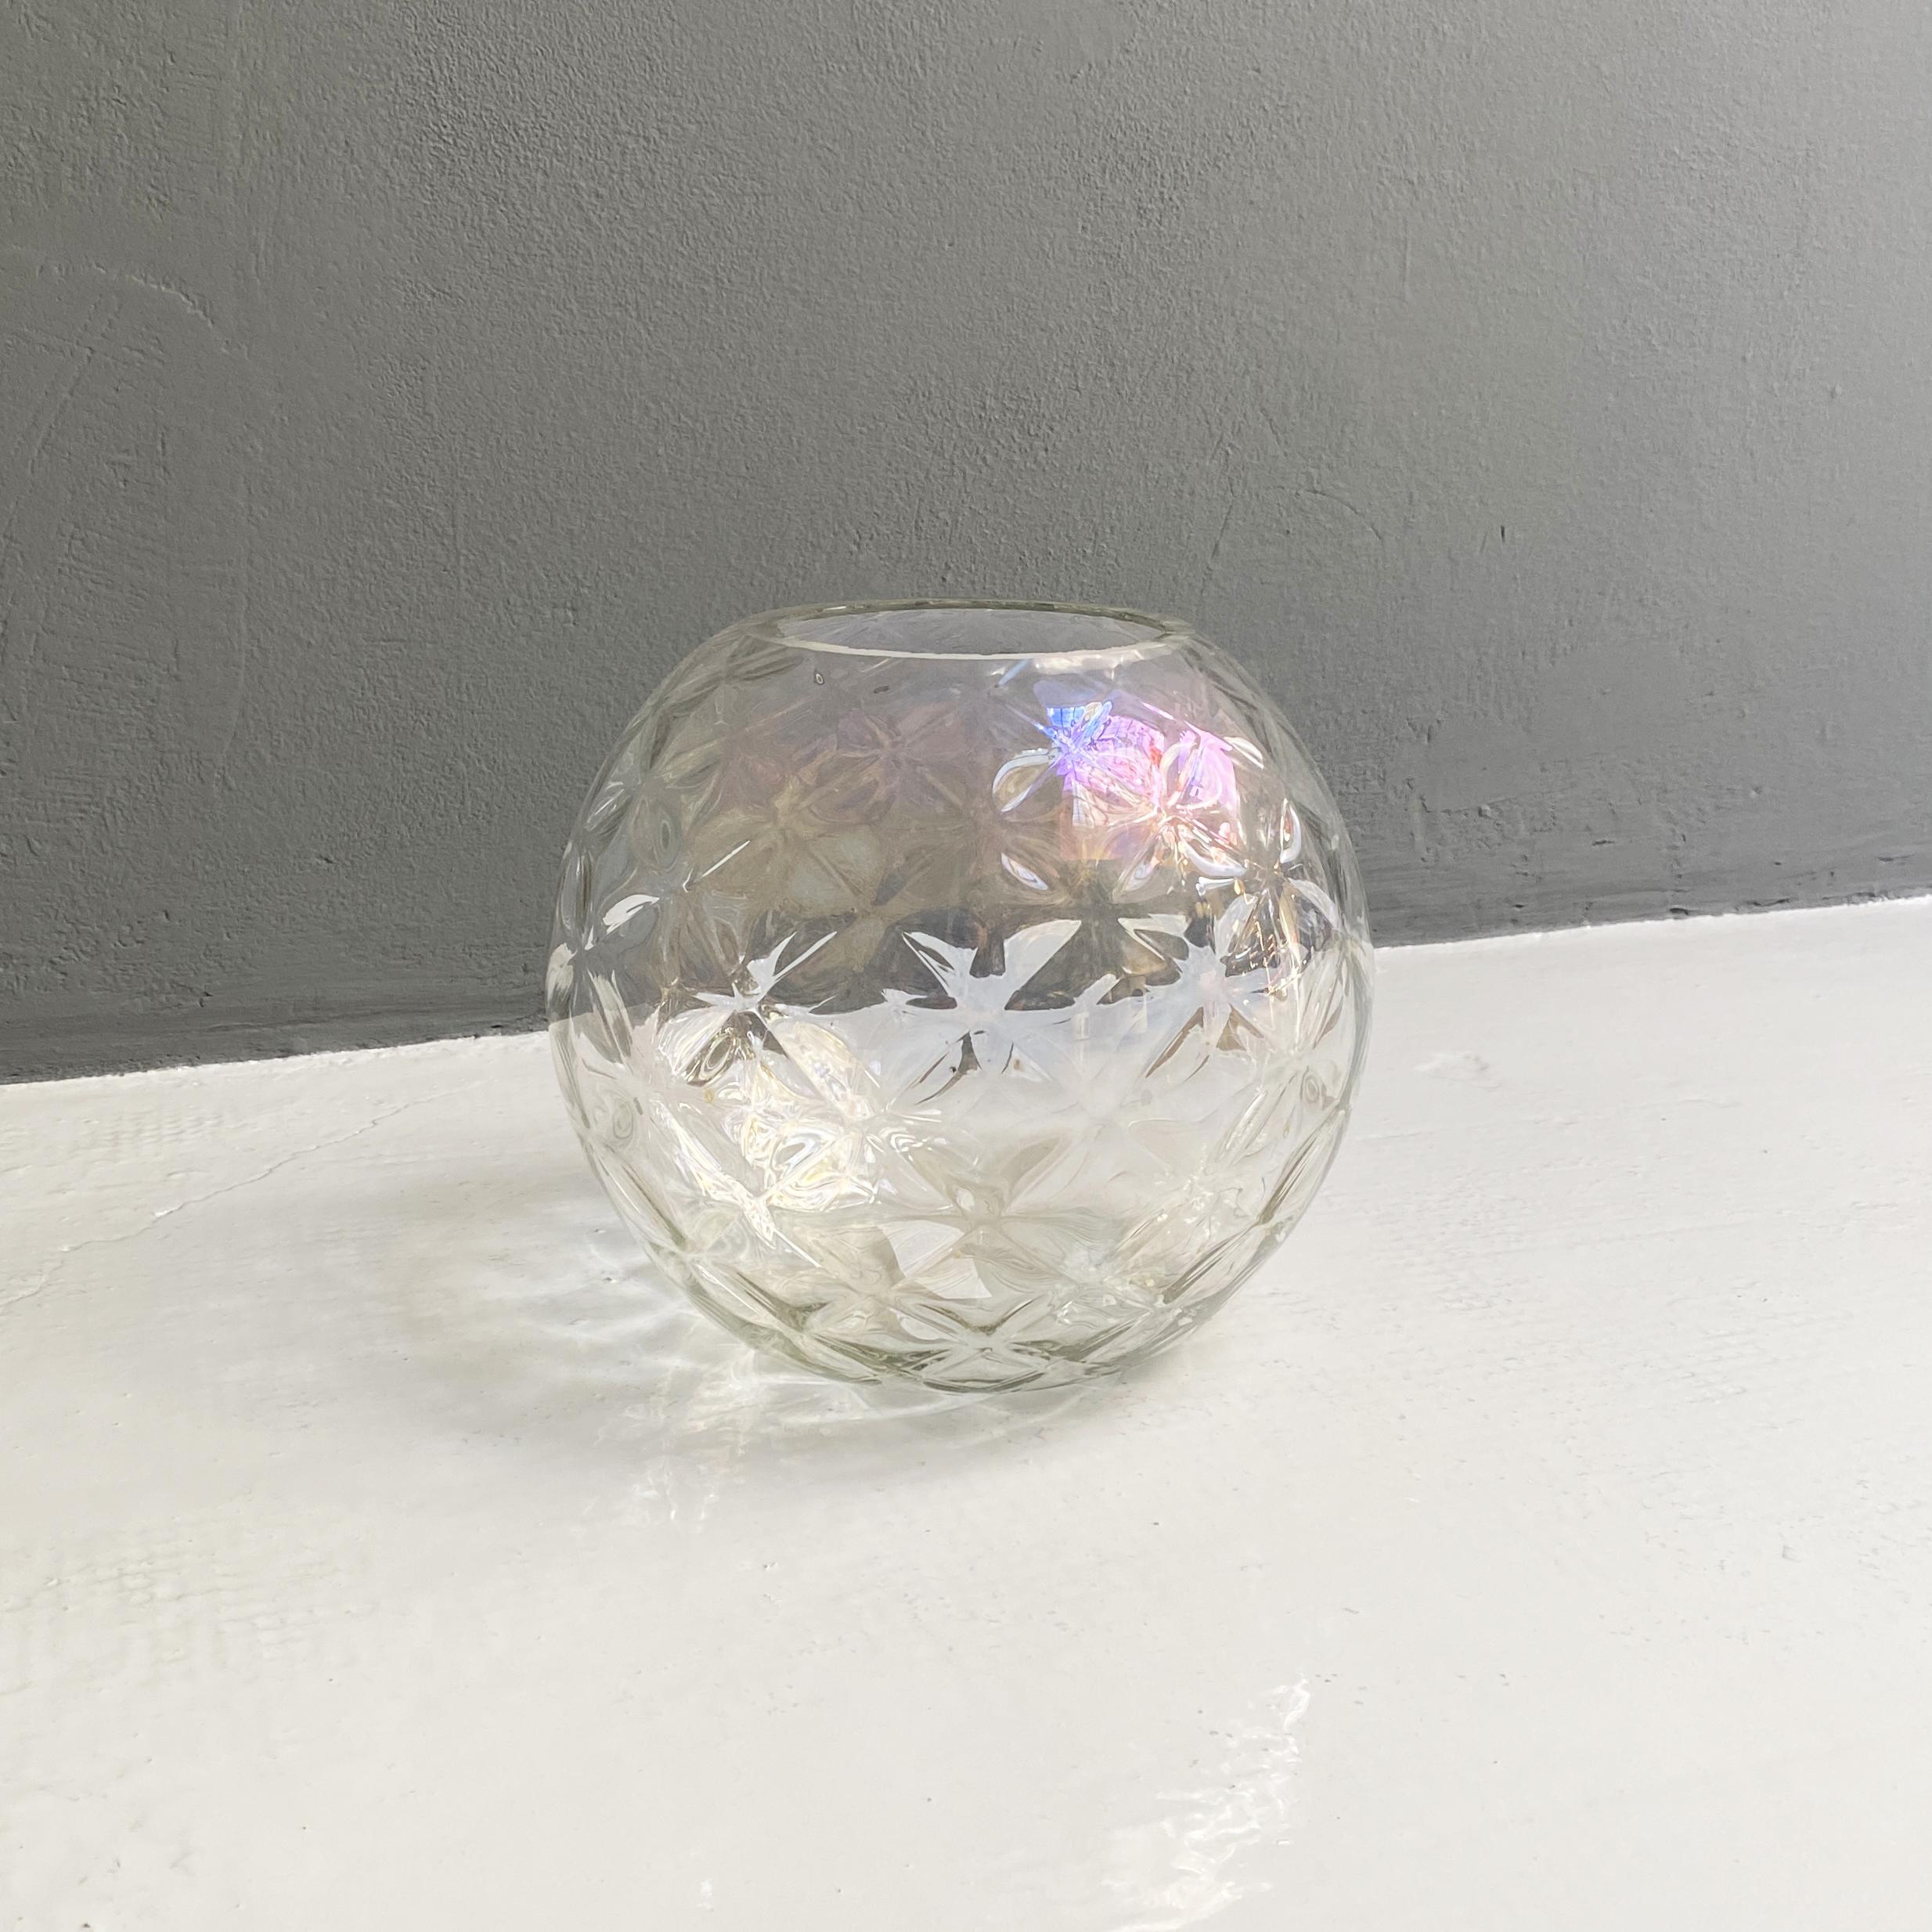 Late 20th Century Italian Modern Transparent Spherical Glass Vase with Rhomboidal Motifs, 1980s For Sale